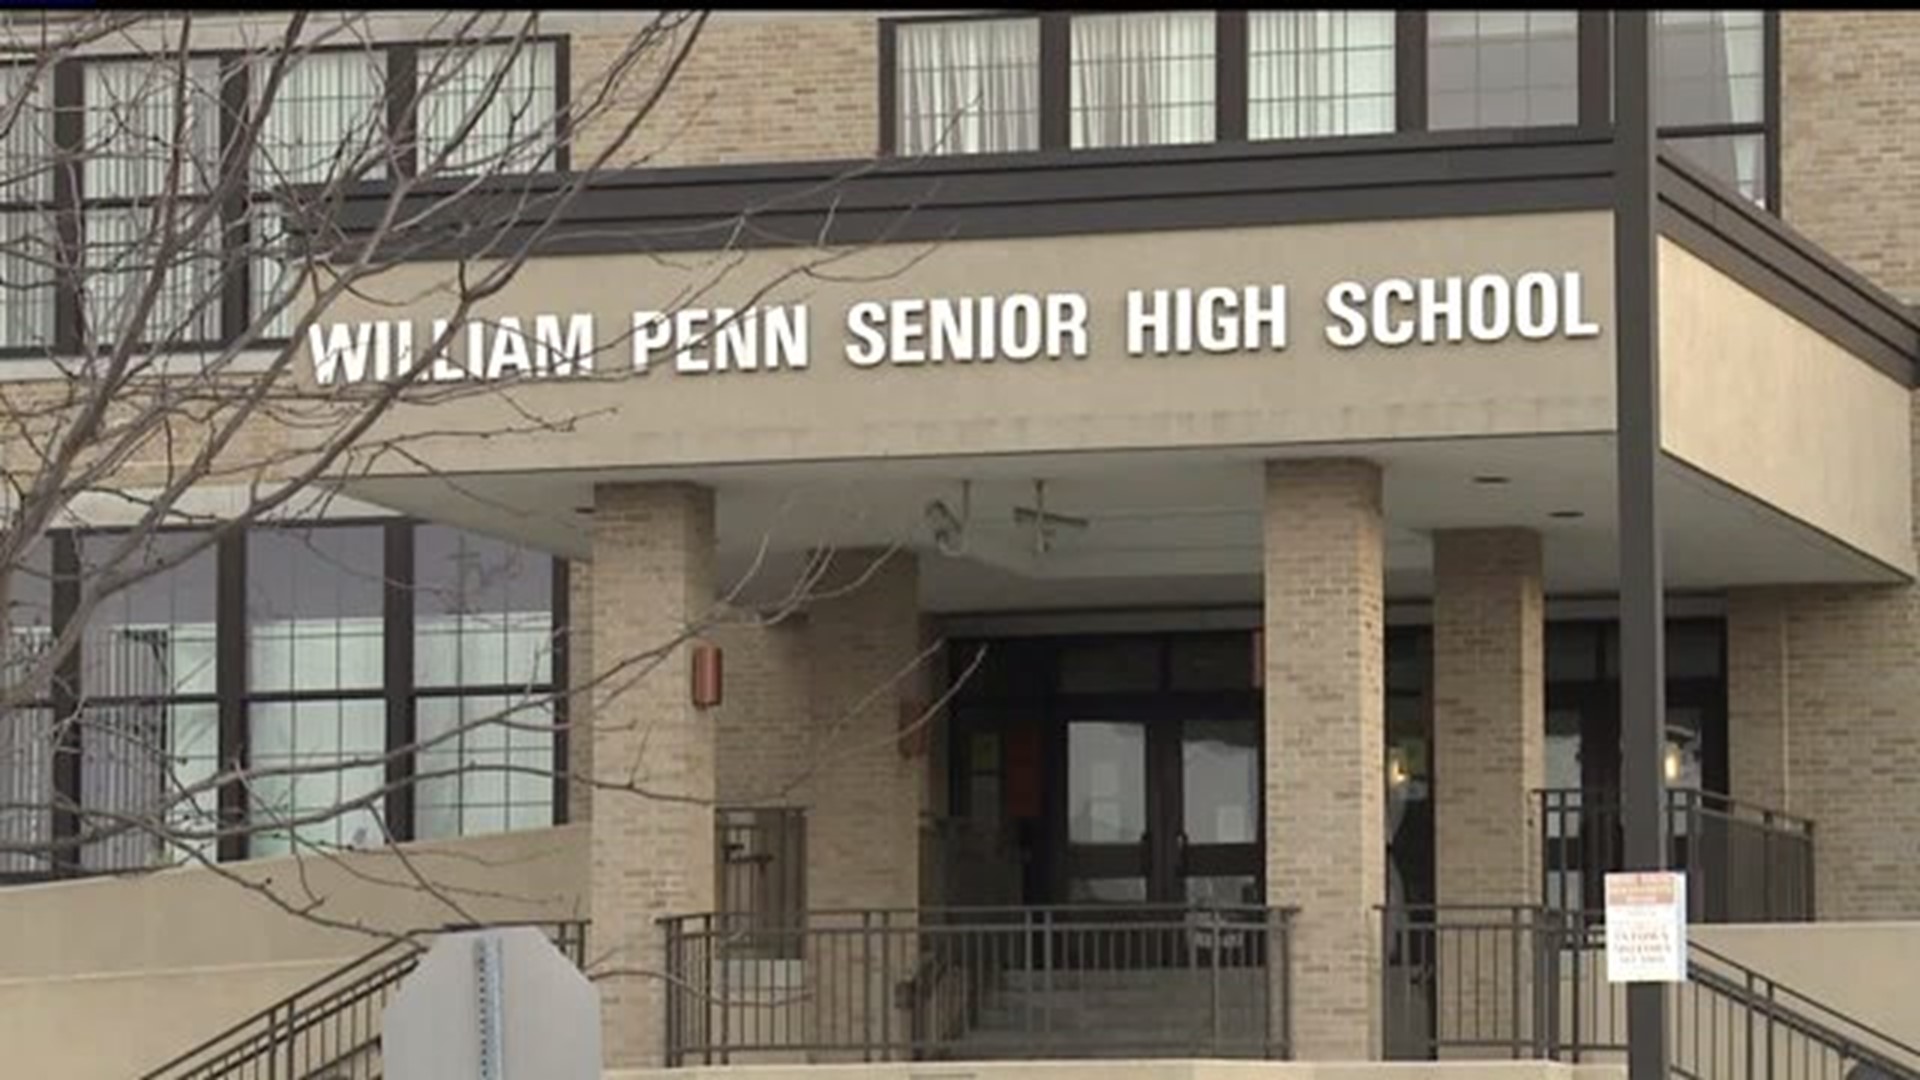 York City School ranked 499 out of 500 in PA